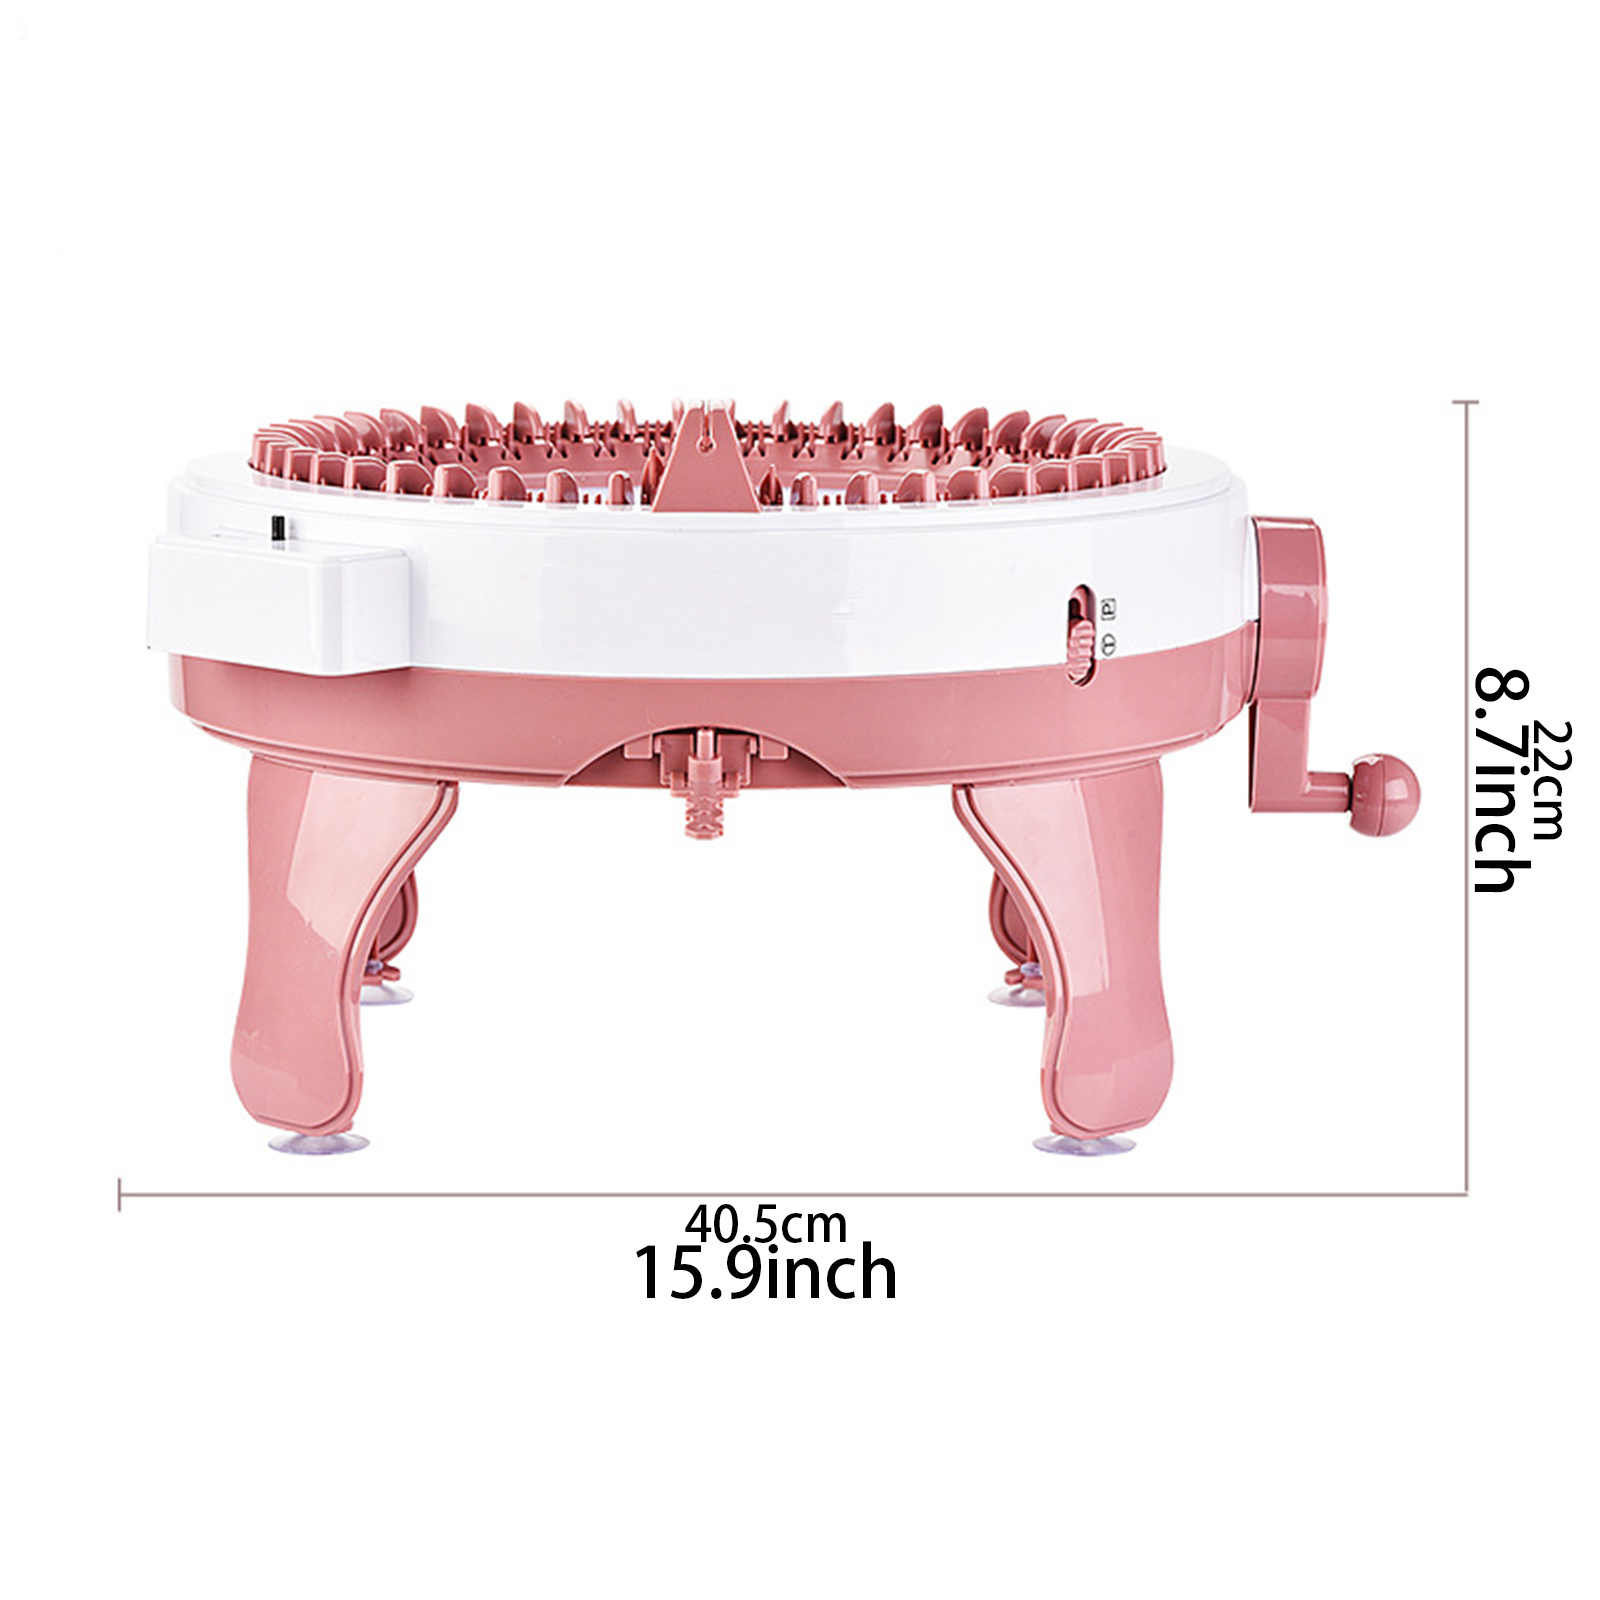 COOAK Knitting Machine, 48 Needles Smart Weaving Loom Round Knitting  Machines with Row Counter, Knitting Board Rotating Double Loom, Weaving  Loom